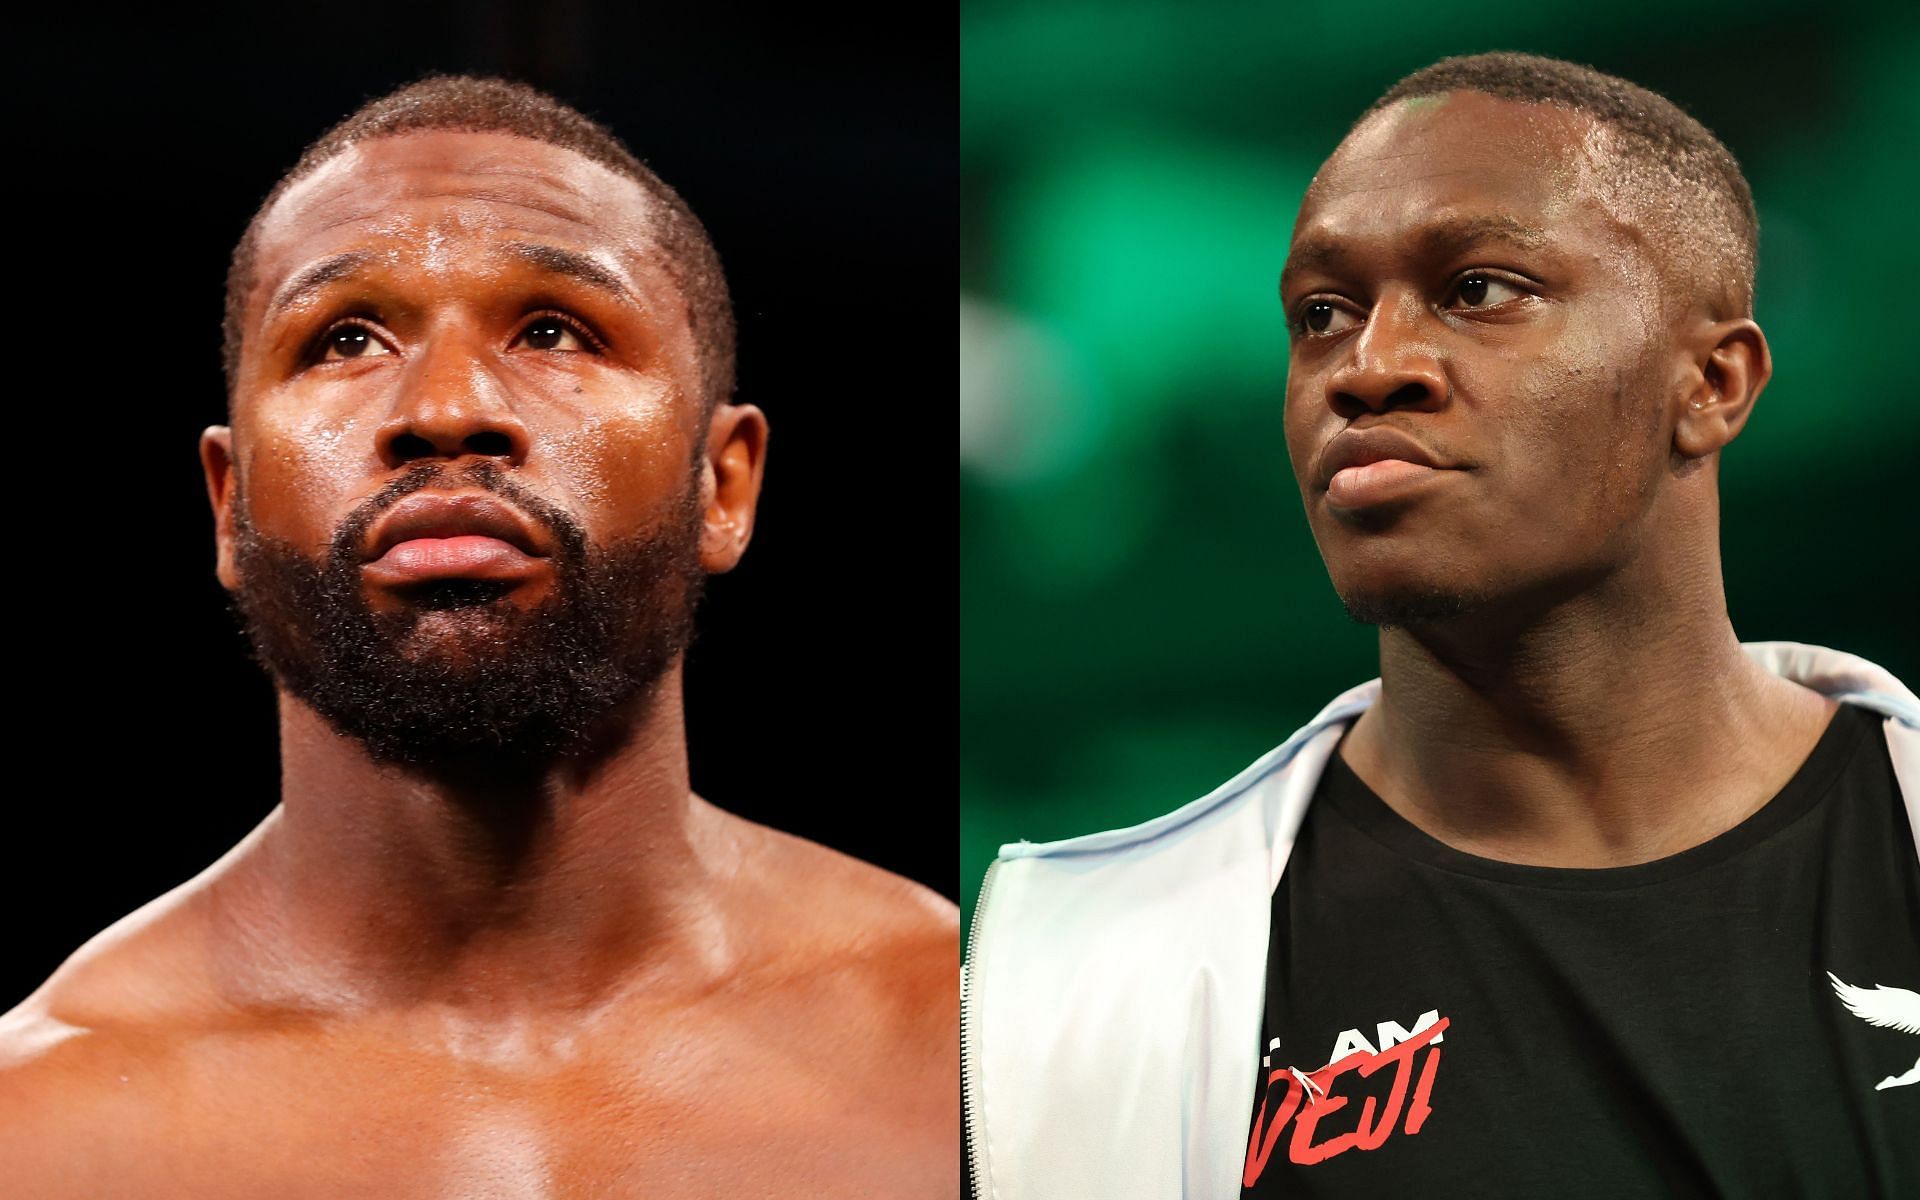 Floyd Mayweather (left) and Deji (right) (Image credits Getty Images)